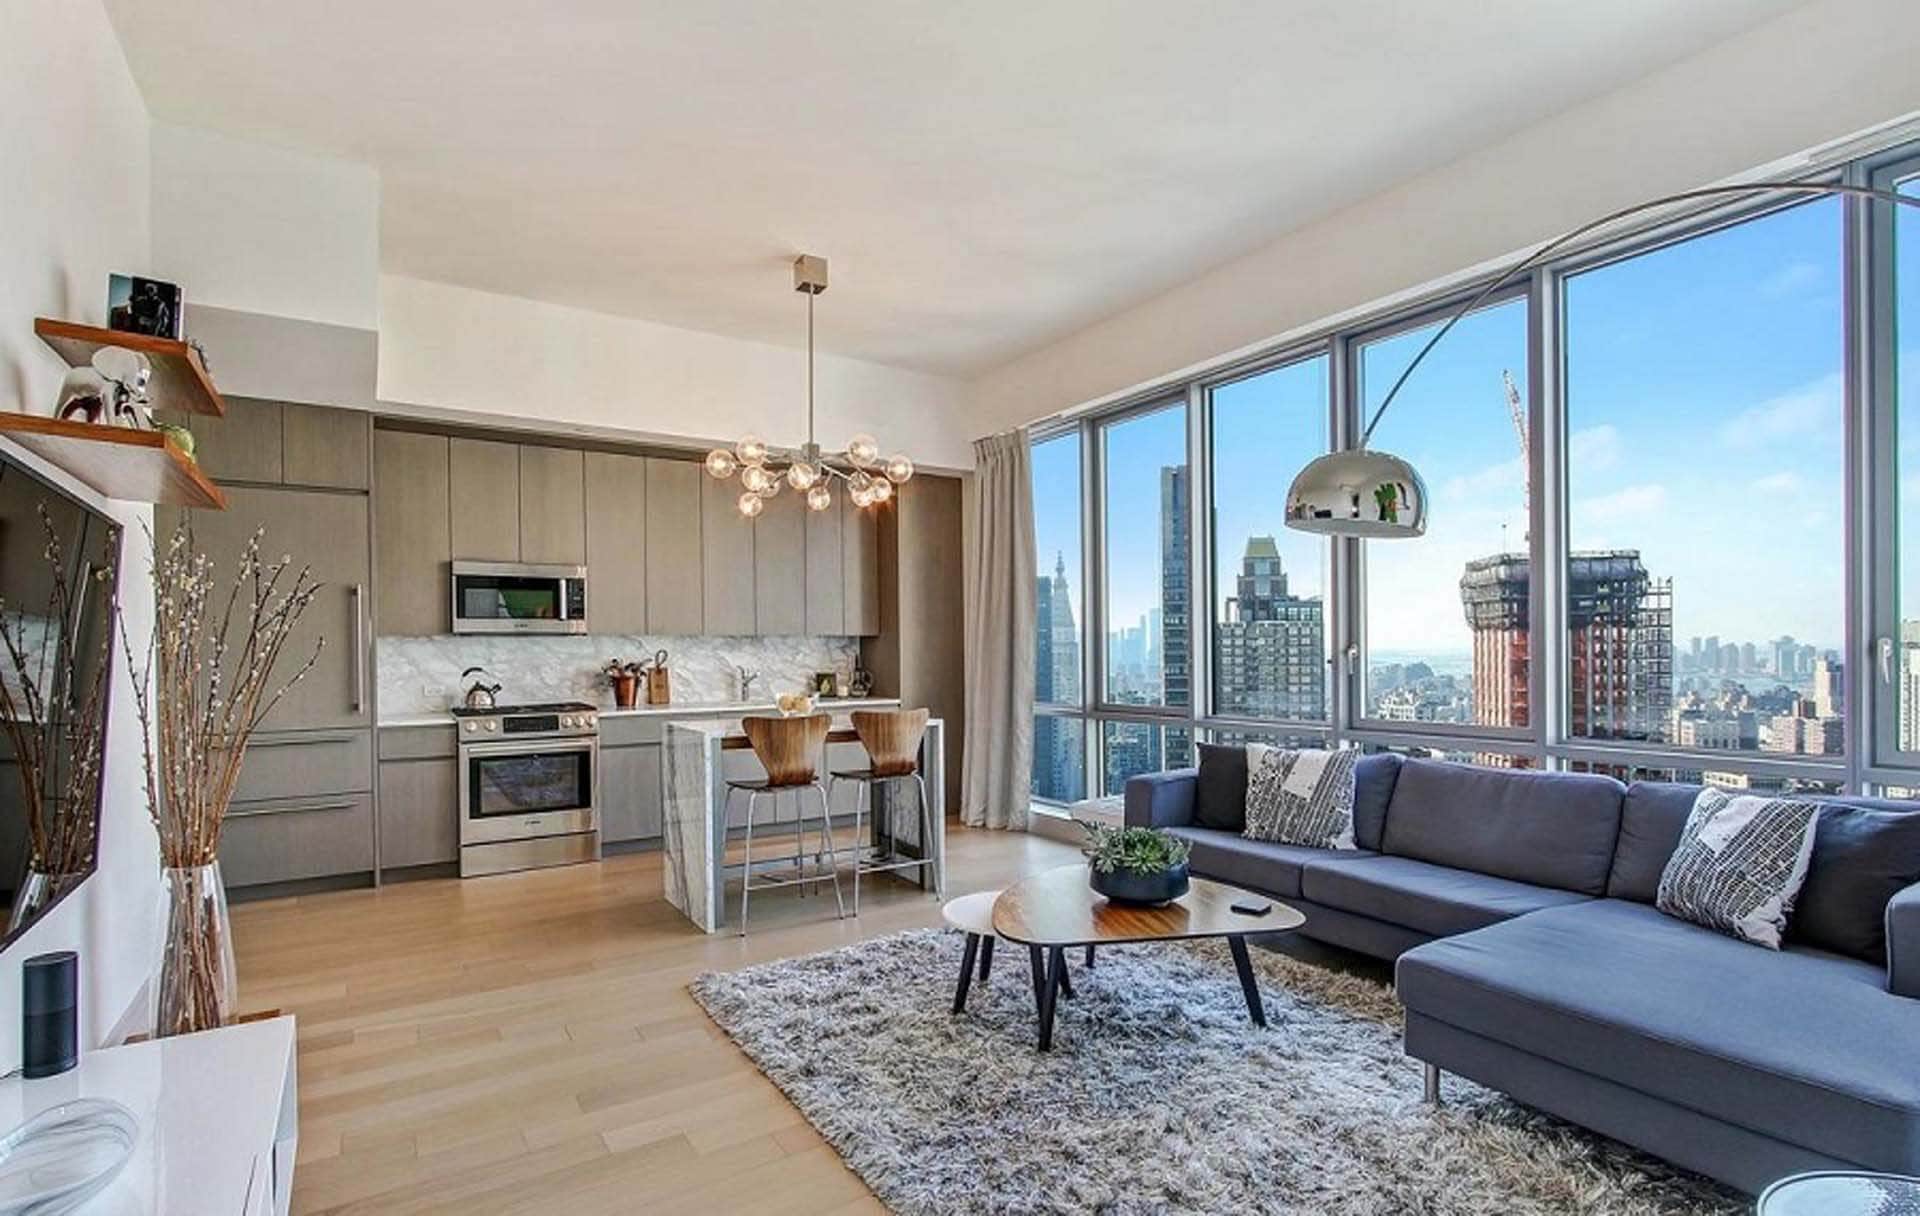 Luxury open-concept penthouse condo features Bilotta Collection kitchen cabinets, large island with seating and NYC skyline view.